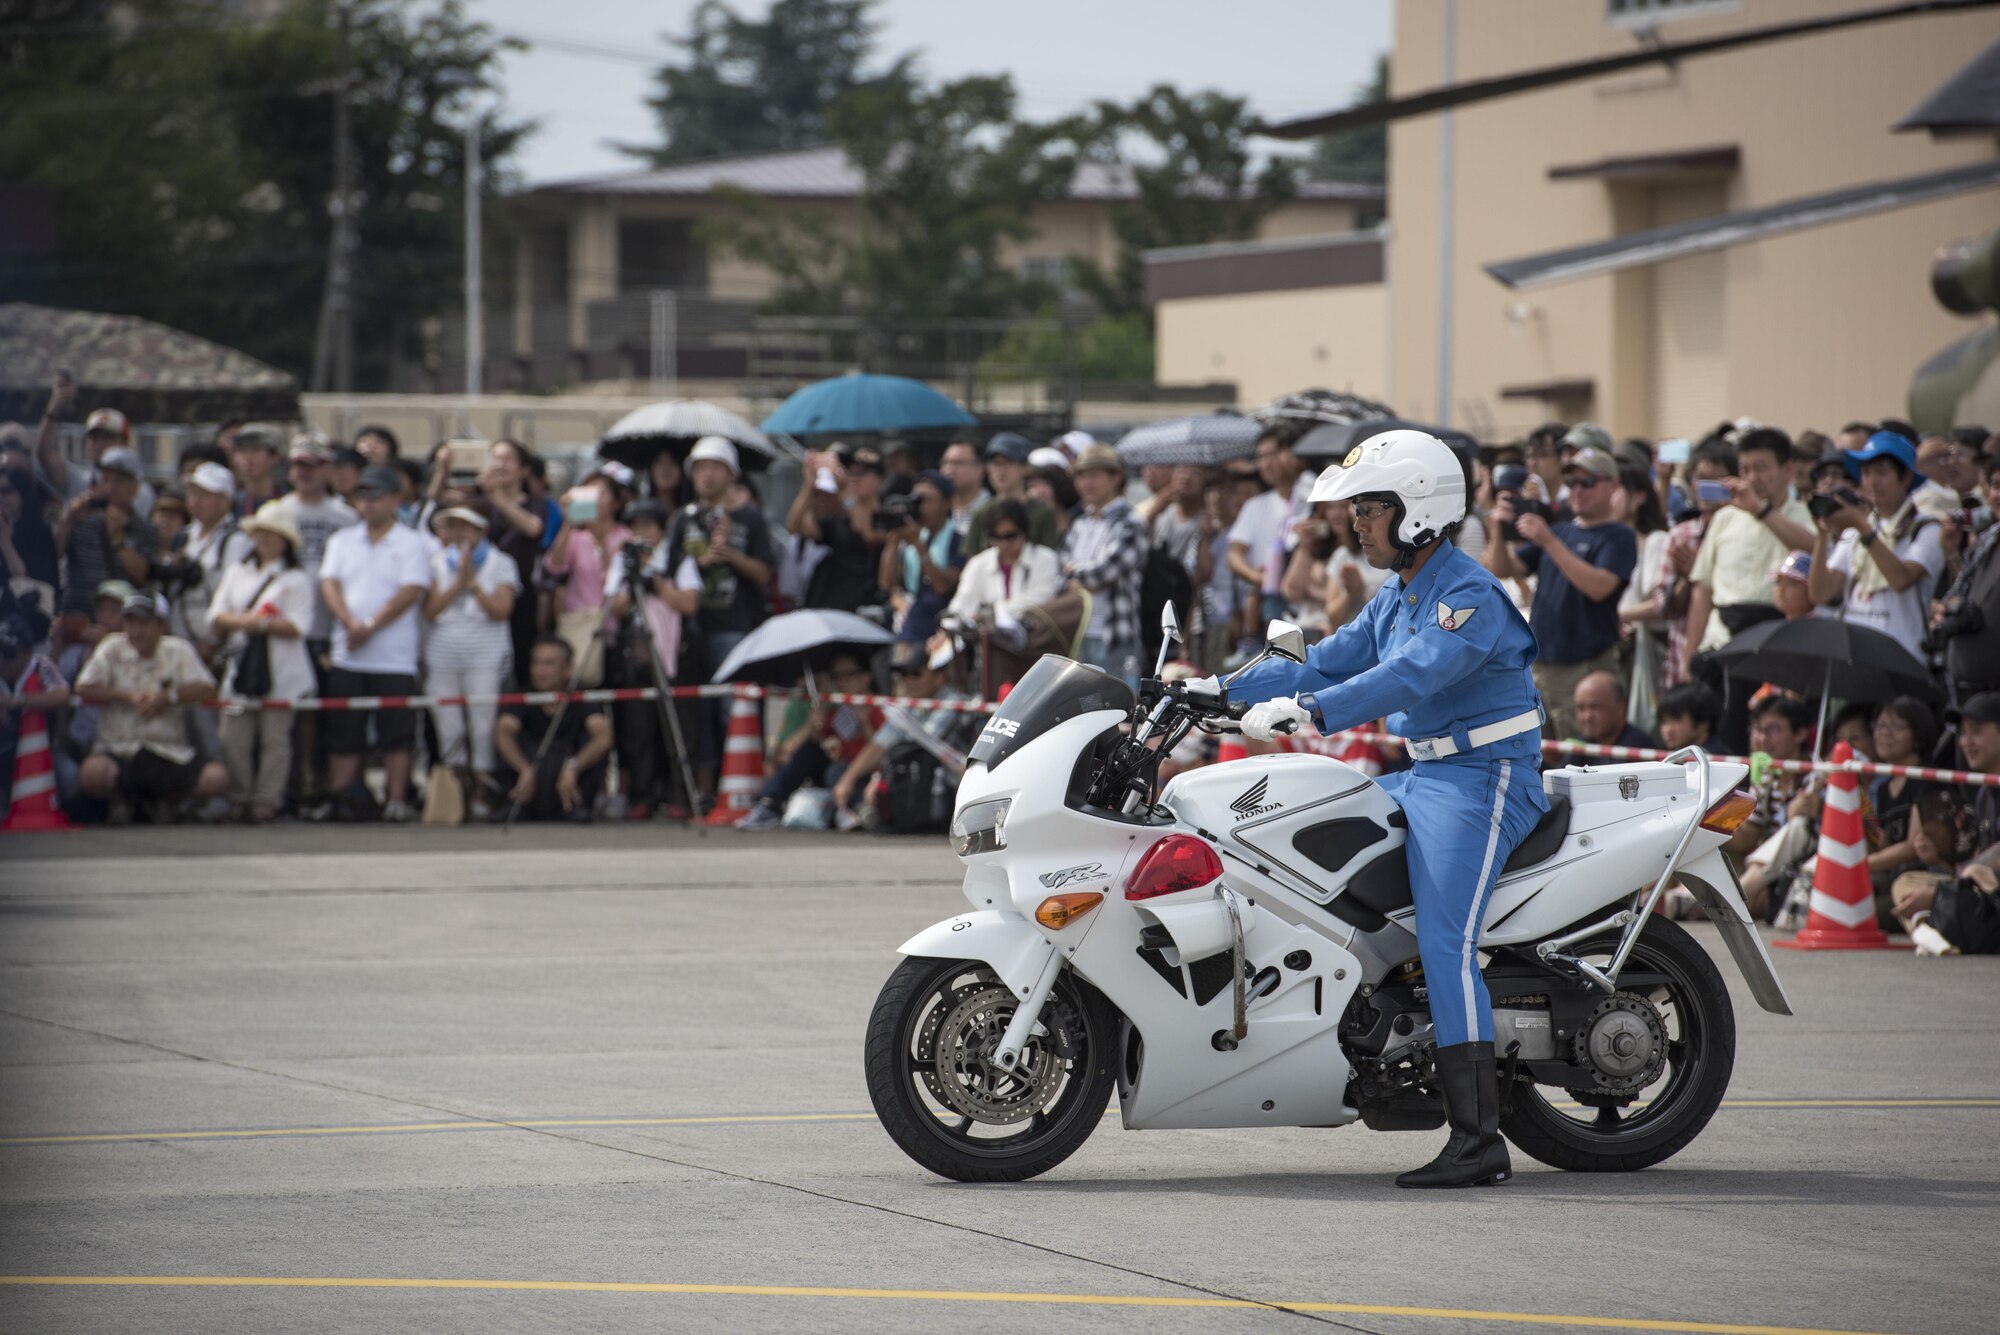 A member of the Tokyo Metropolitan Police Department 9th District traffic mobile unit prepares for his next movement of a motorcycle demonstration during the 2016 Japanese-American Friendship Festival at Yokota Air Base, Japan, Sept. 17, 2016. The festival hosted food vendors, static aircraft displays, live entertainment and military and government demonstrations. (U.S. Air Force photo by Staff Sgt. Cody H. Ramirez/Released)